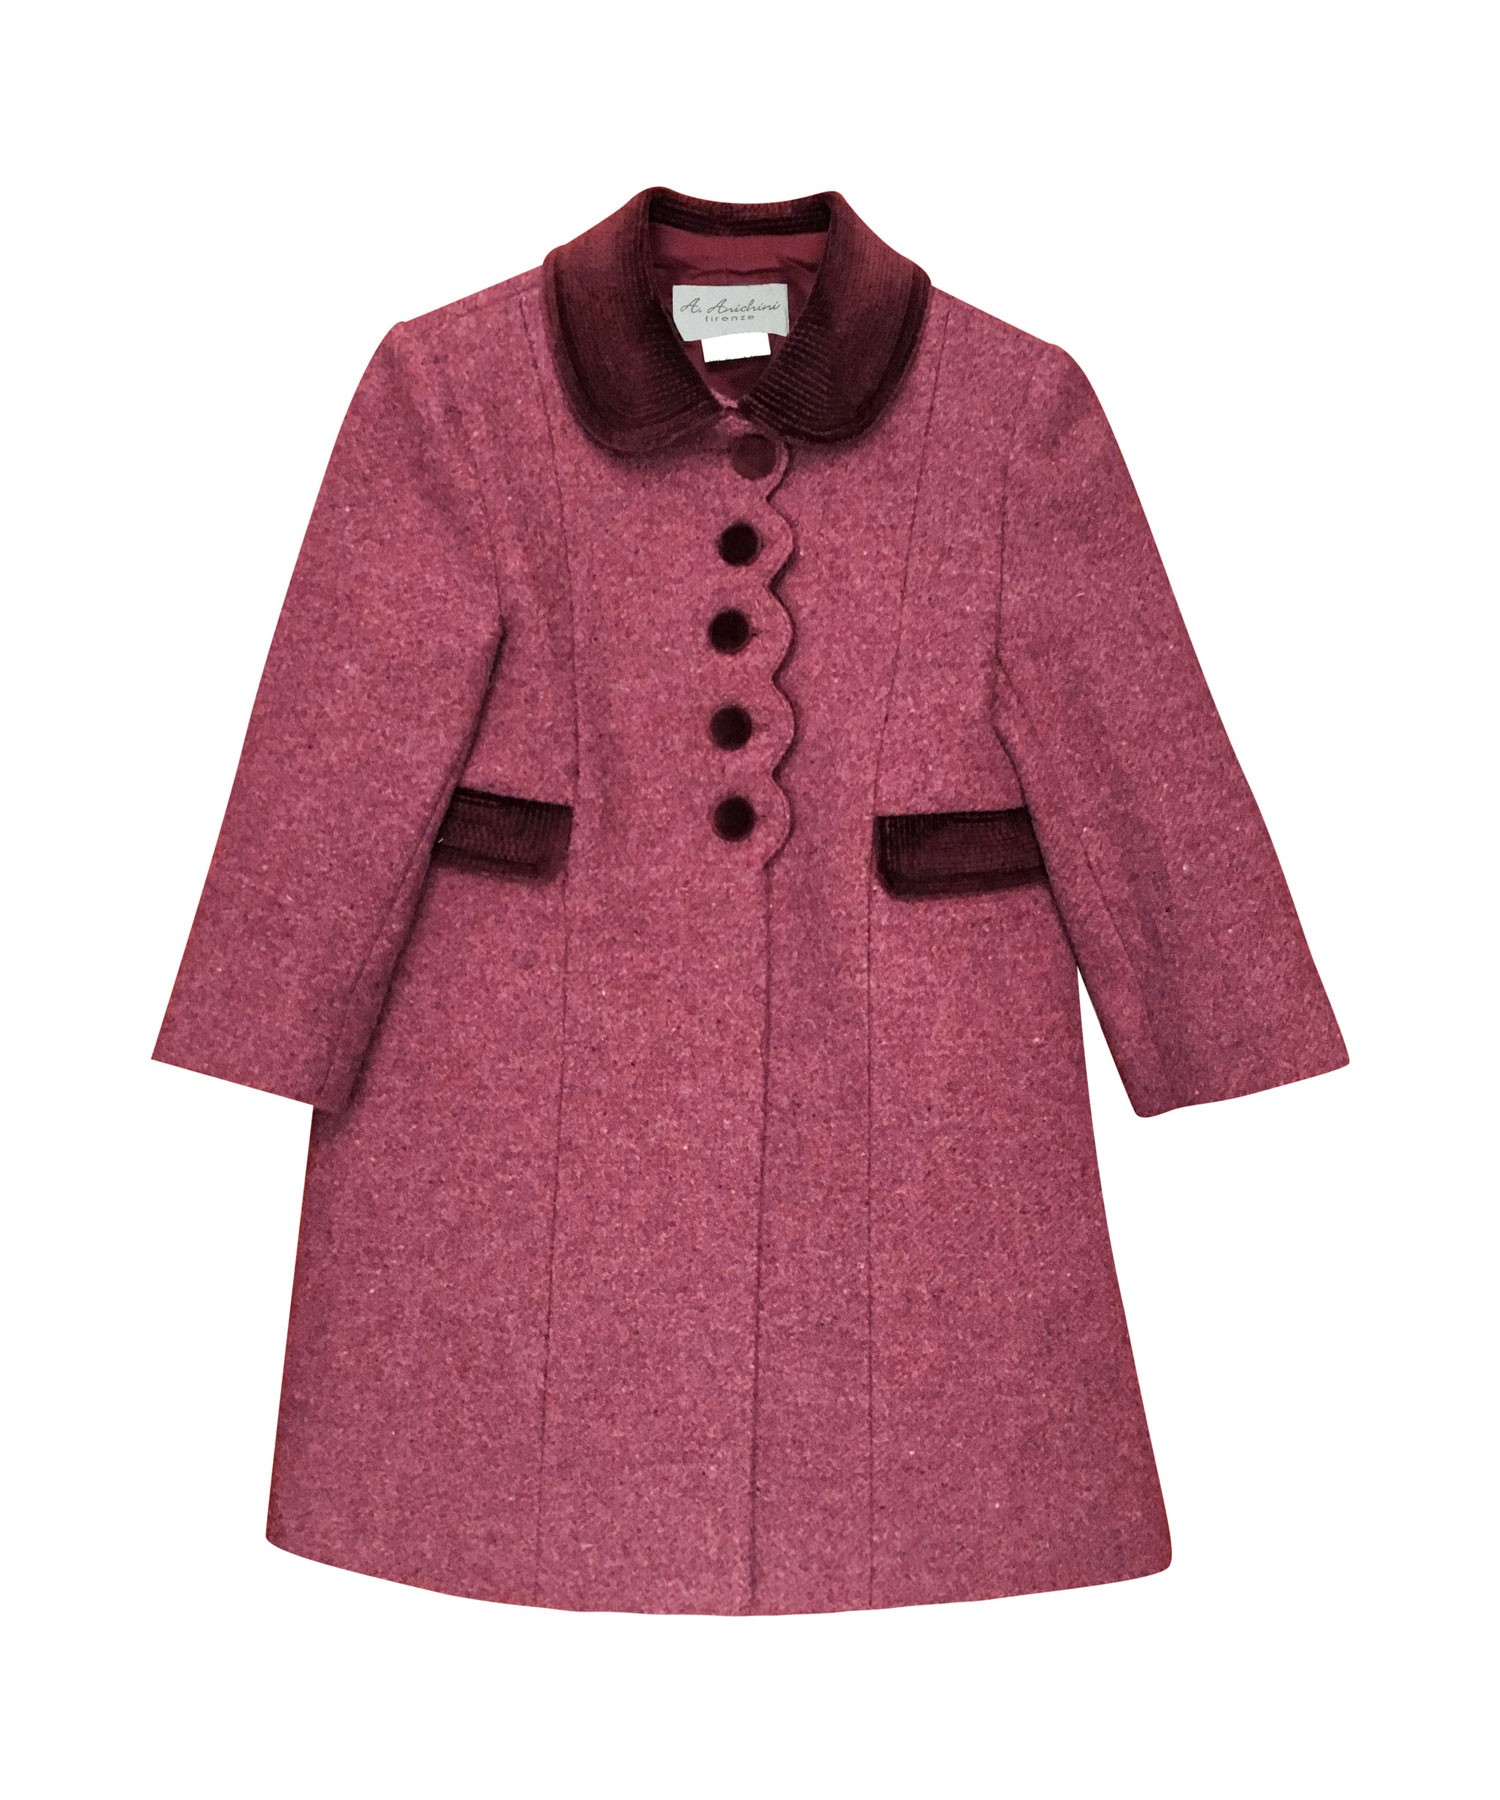 Coat for girl and baby girl, 